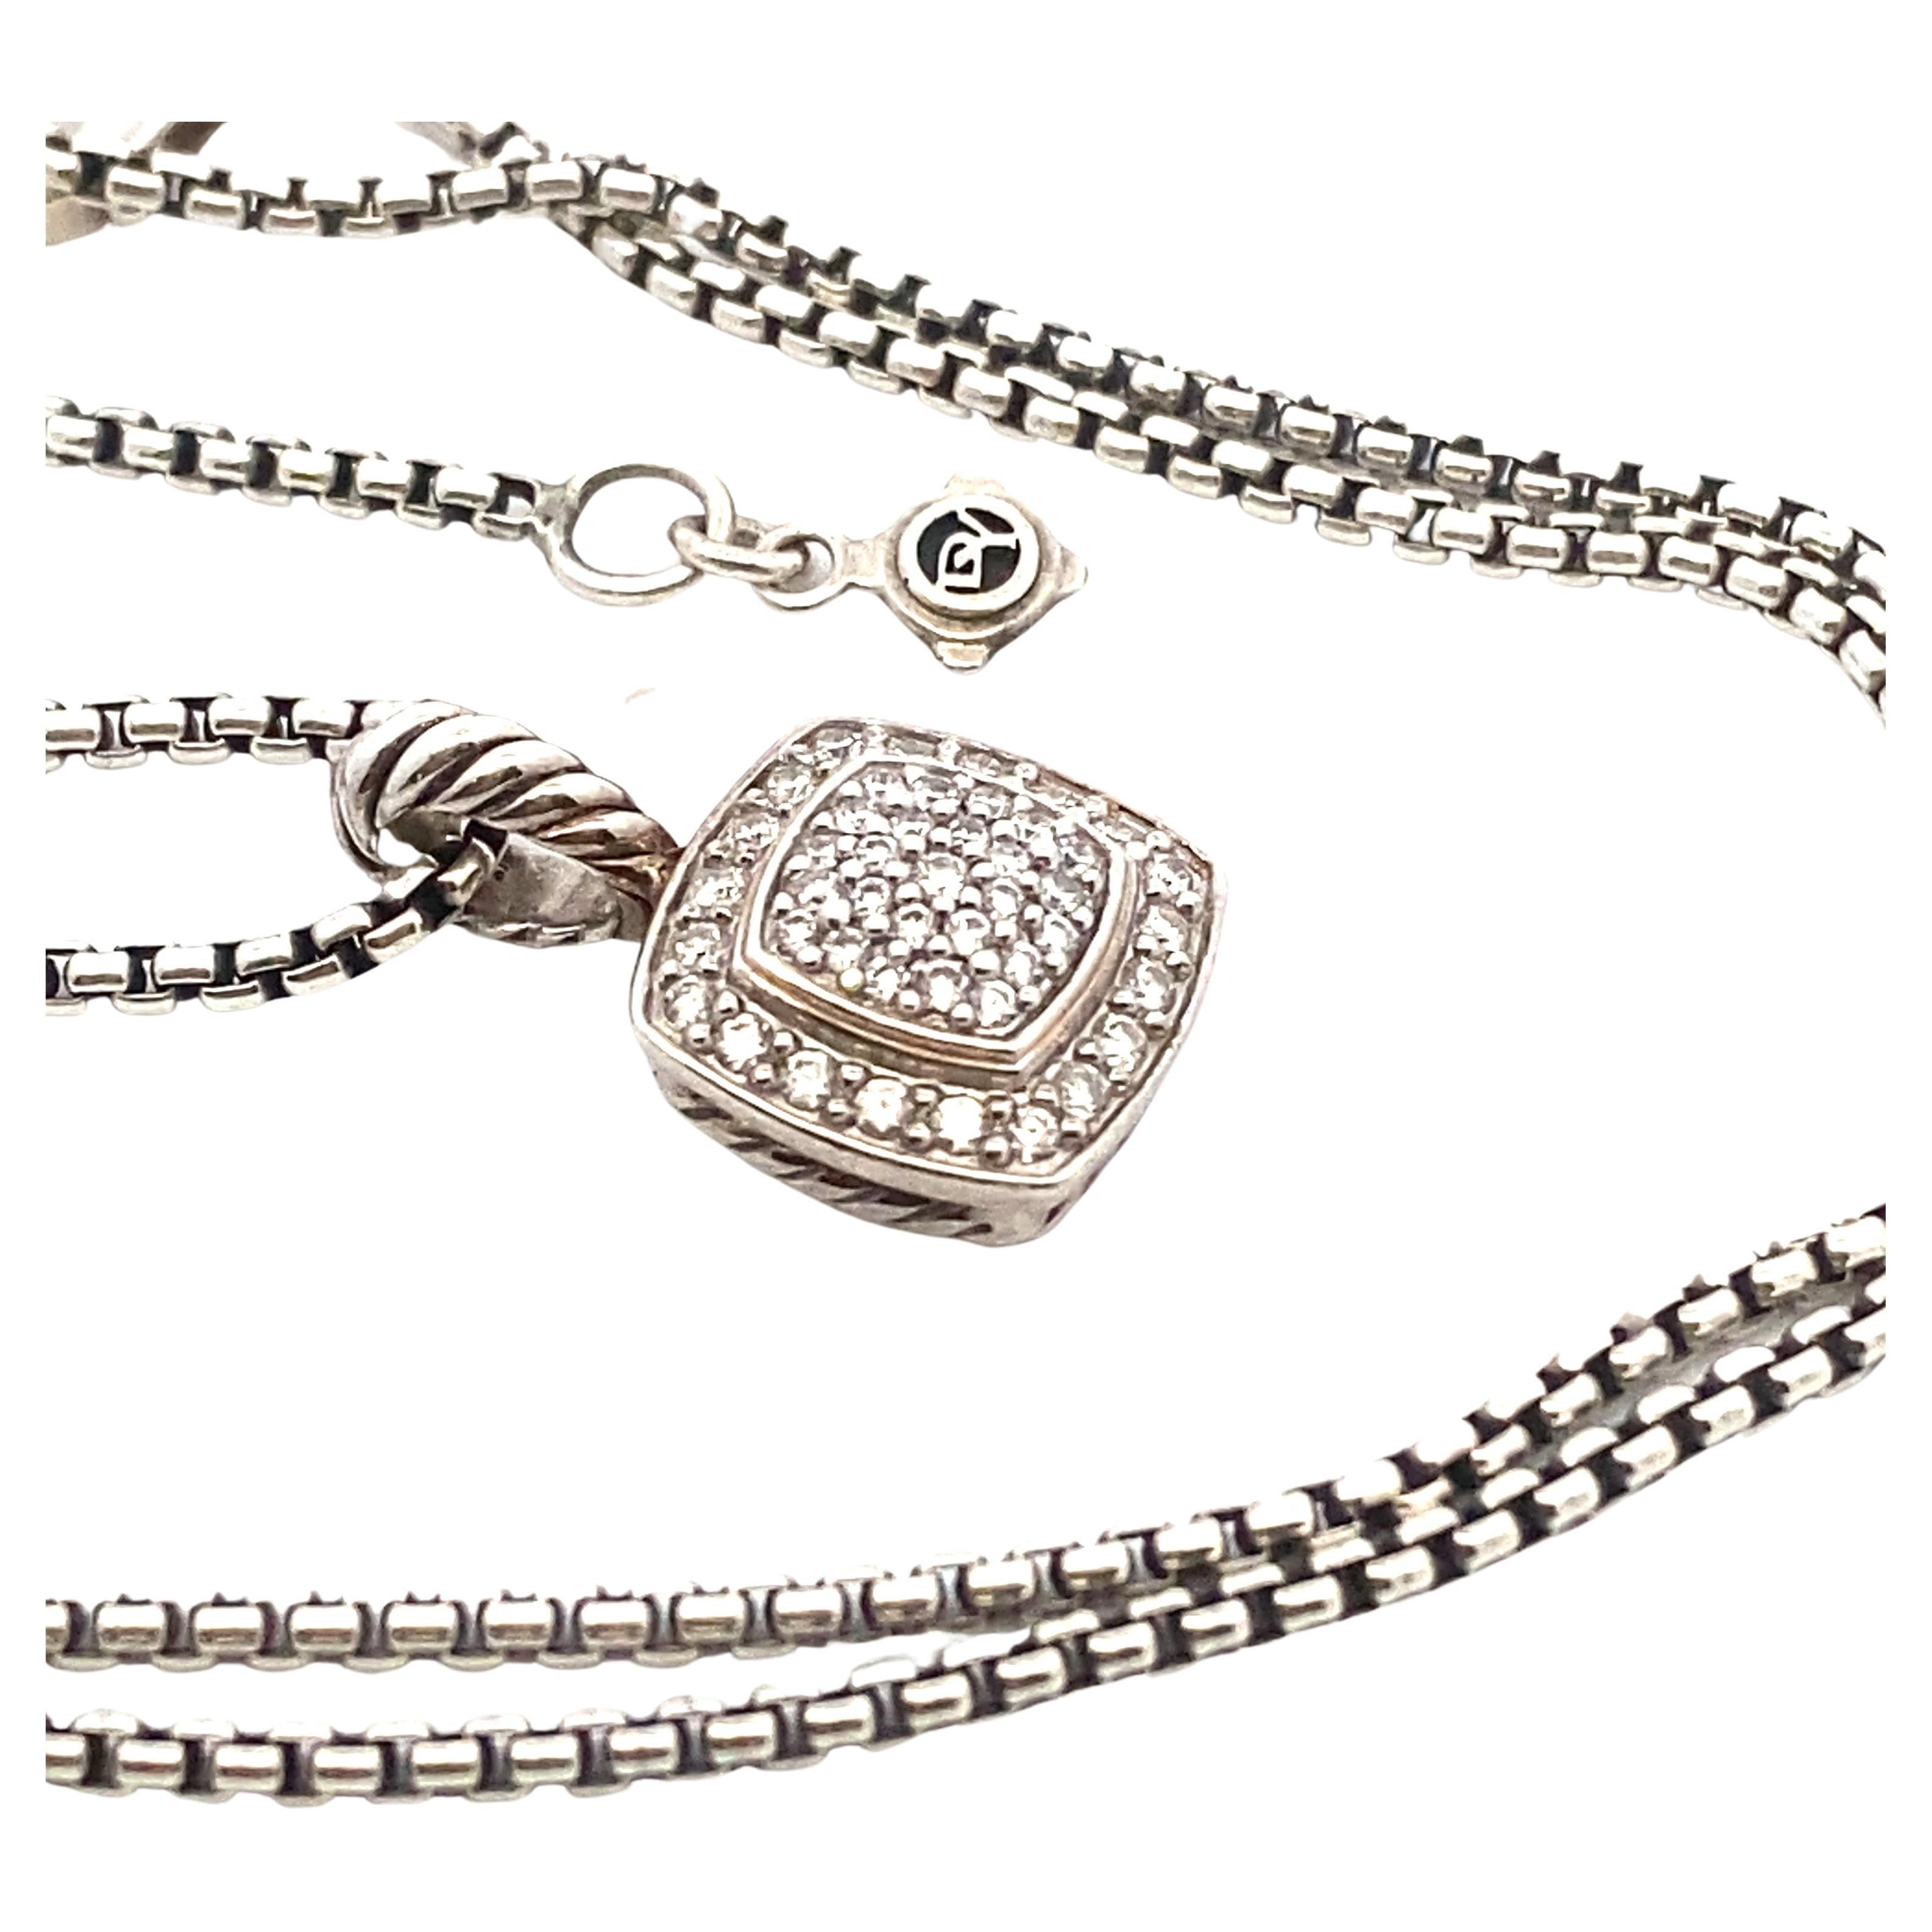 David Yurman Petite Albion Pendant Necklace in Sterling Silver with Pavé Diamon For Sale